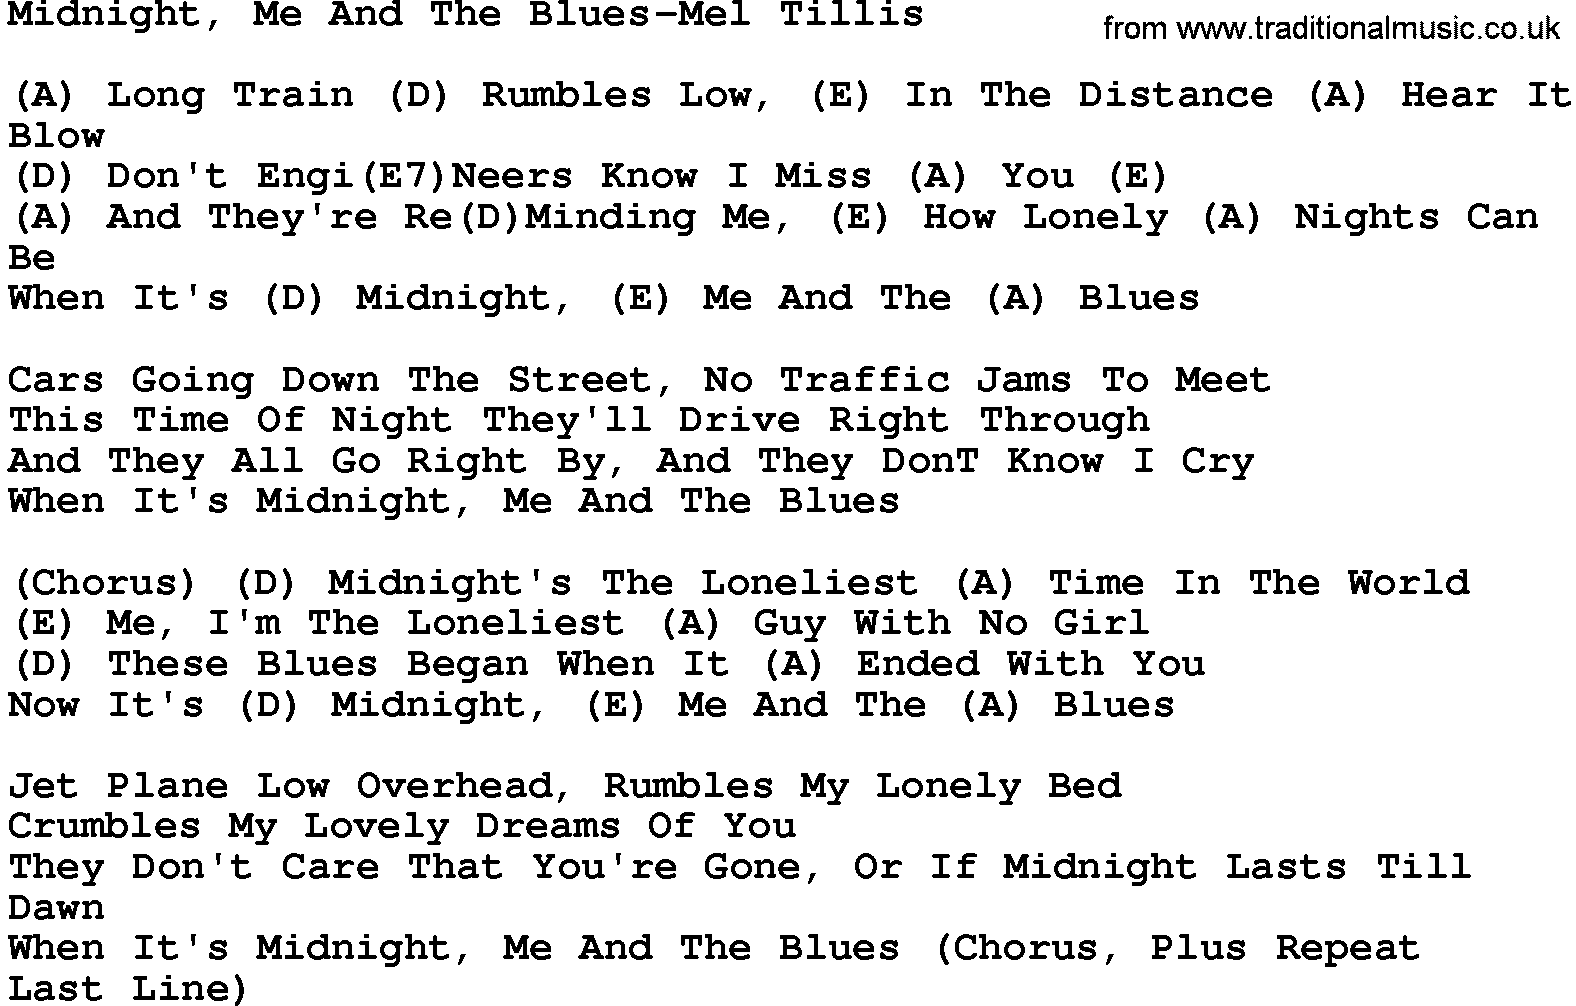 Country music song: Midnight, Me And The Blues-Mel Tillis lyrics and chords